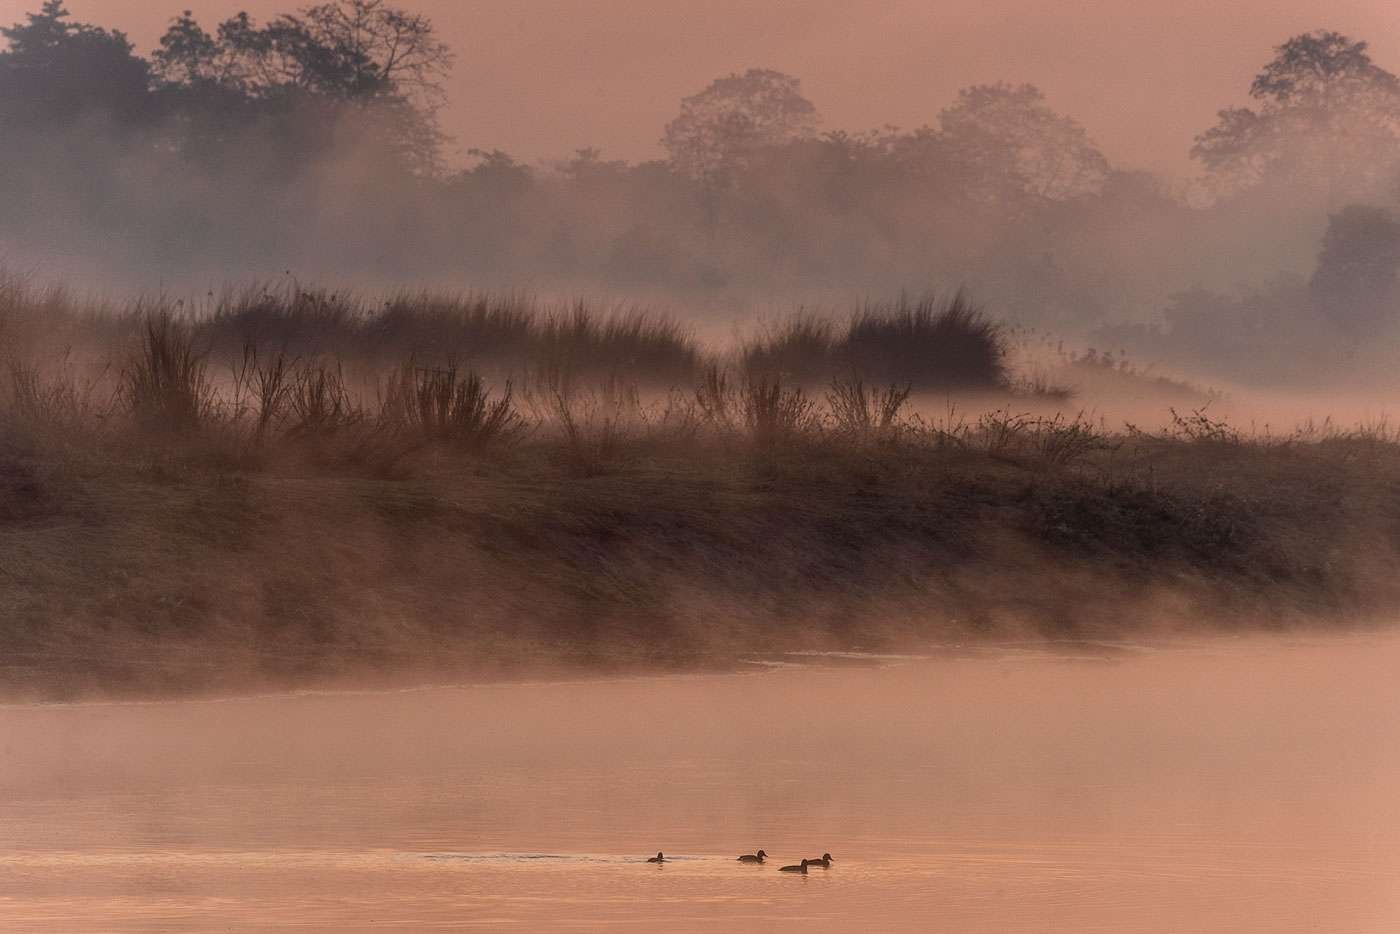 In Assam, India, river fowl make their morning commute amidst the delicate colours and hovering river-smoke at dawn.